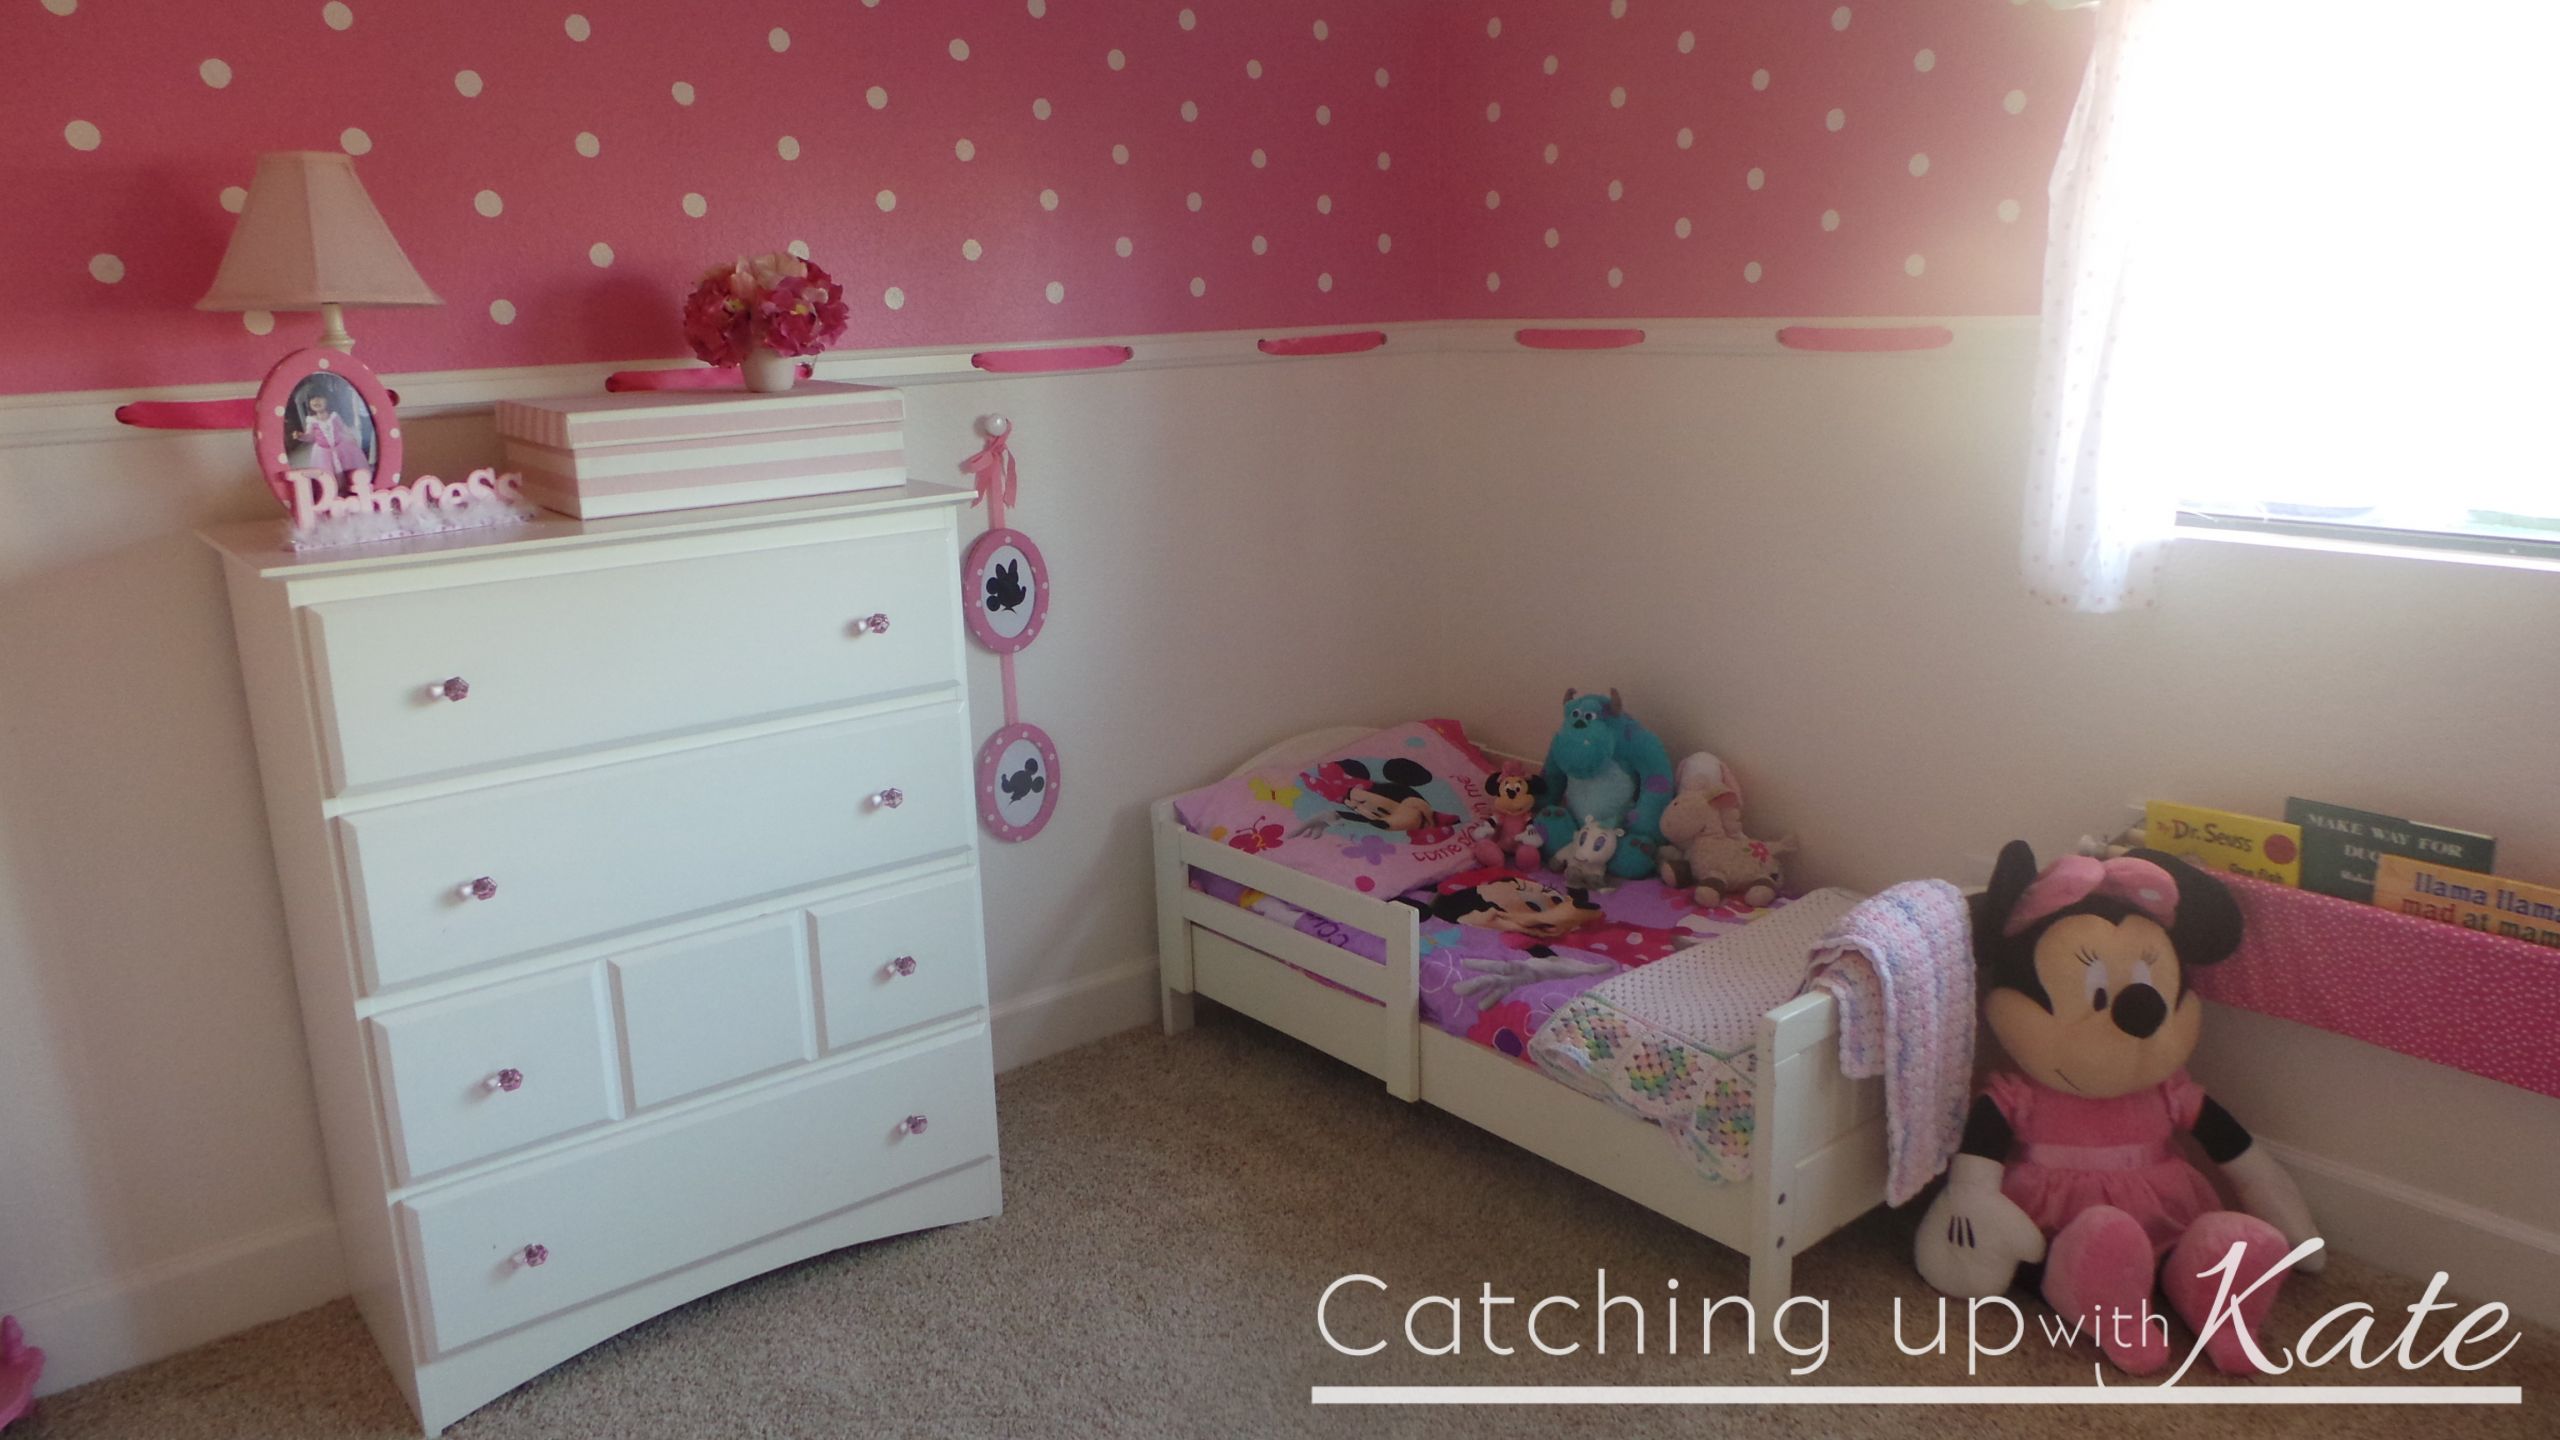 Minnie Mouse Baby Room Decor
 Minnie Mouse Room DIY Decor Highlights Along the Way